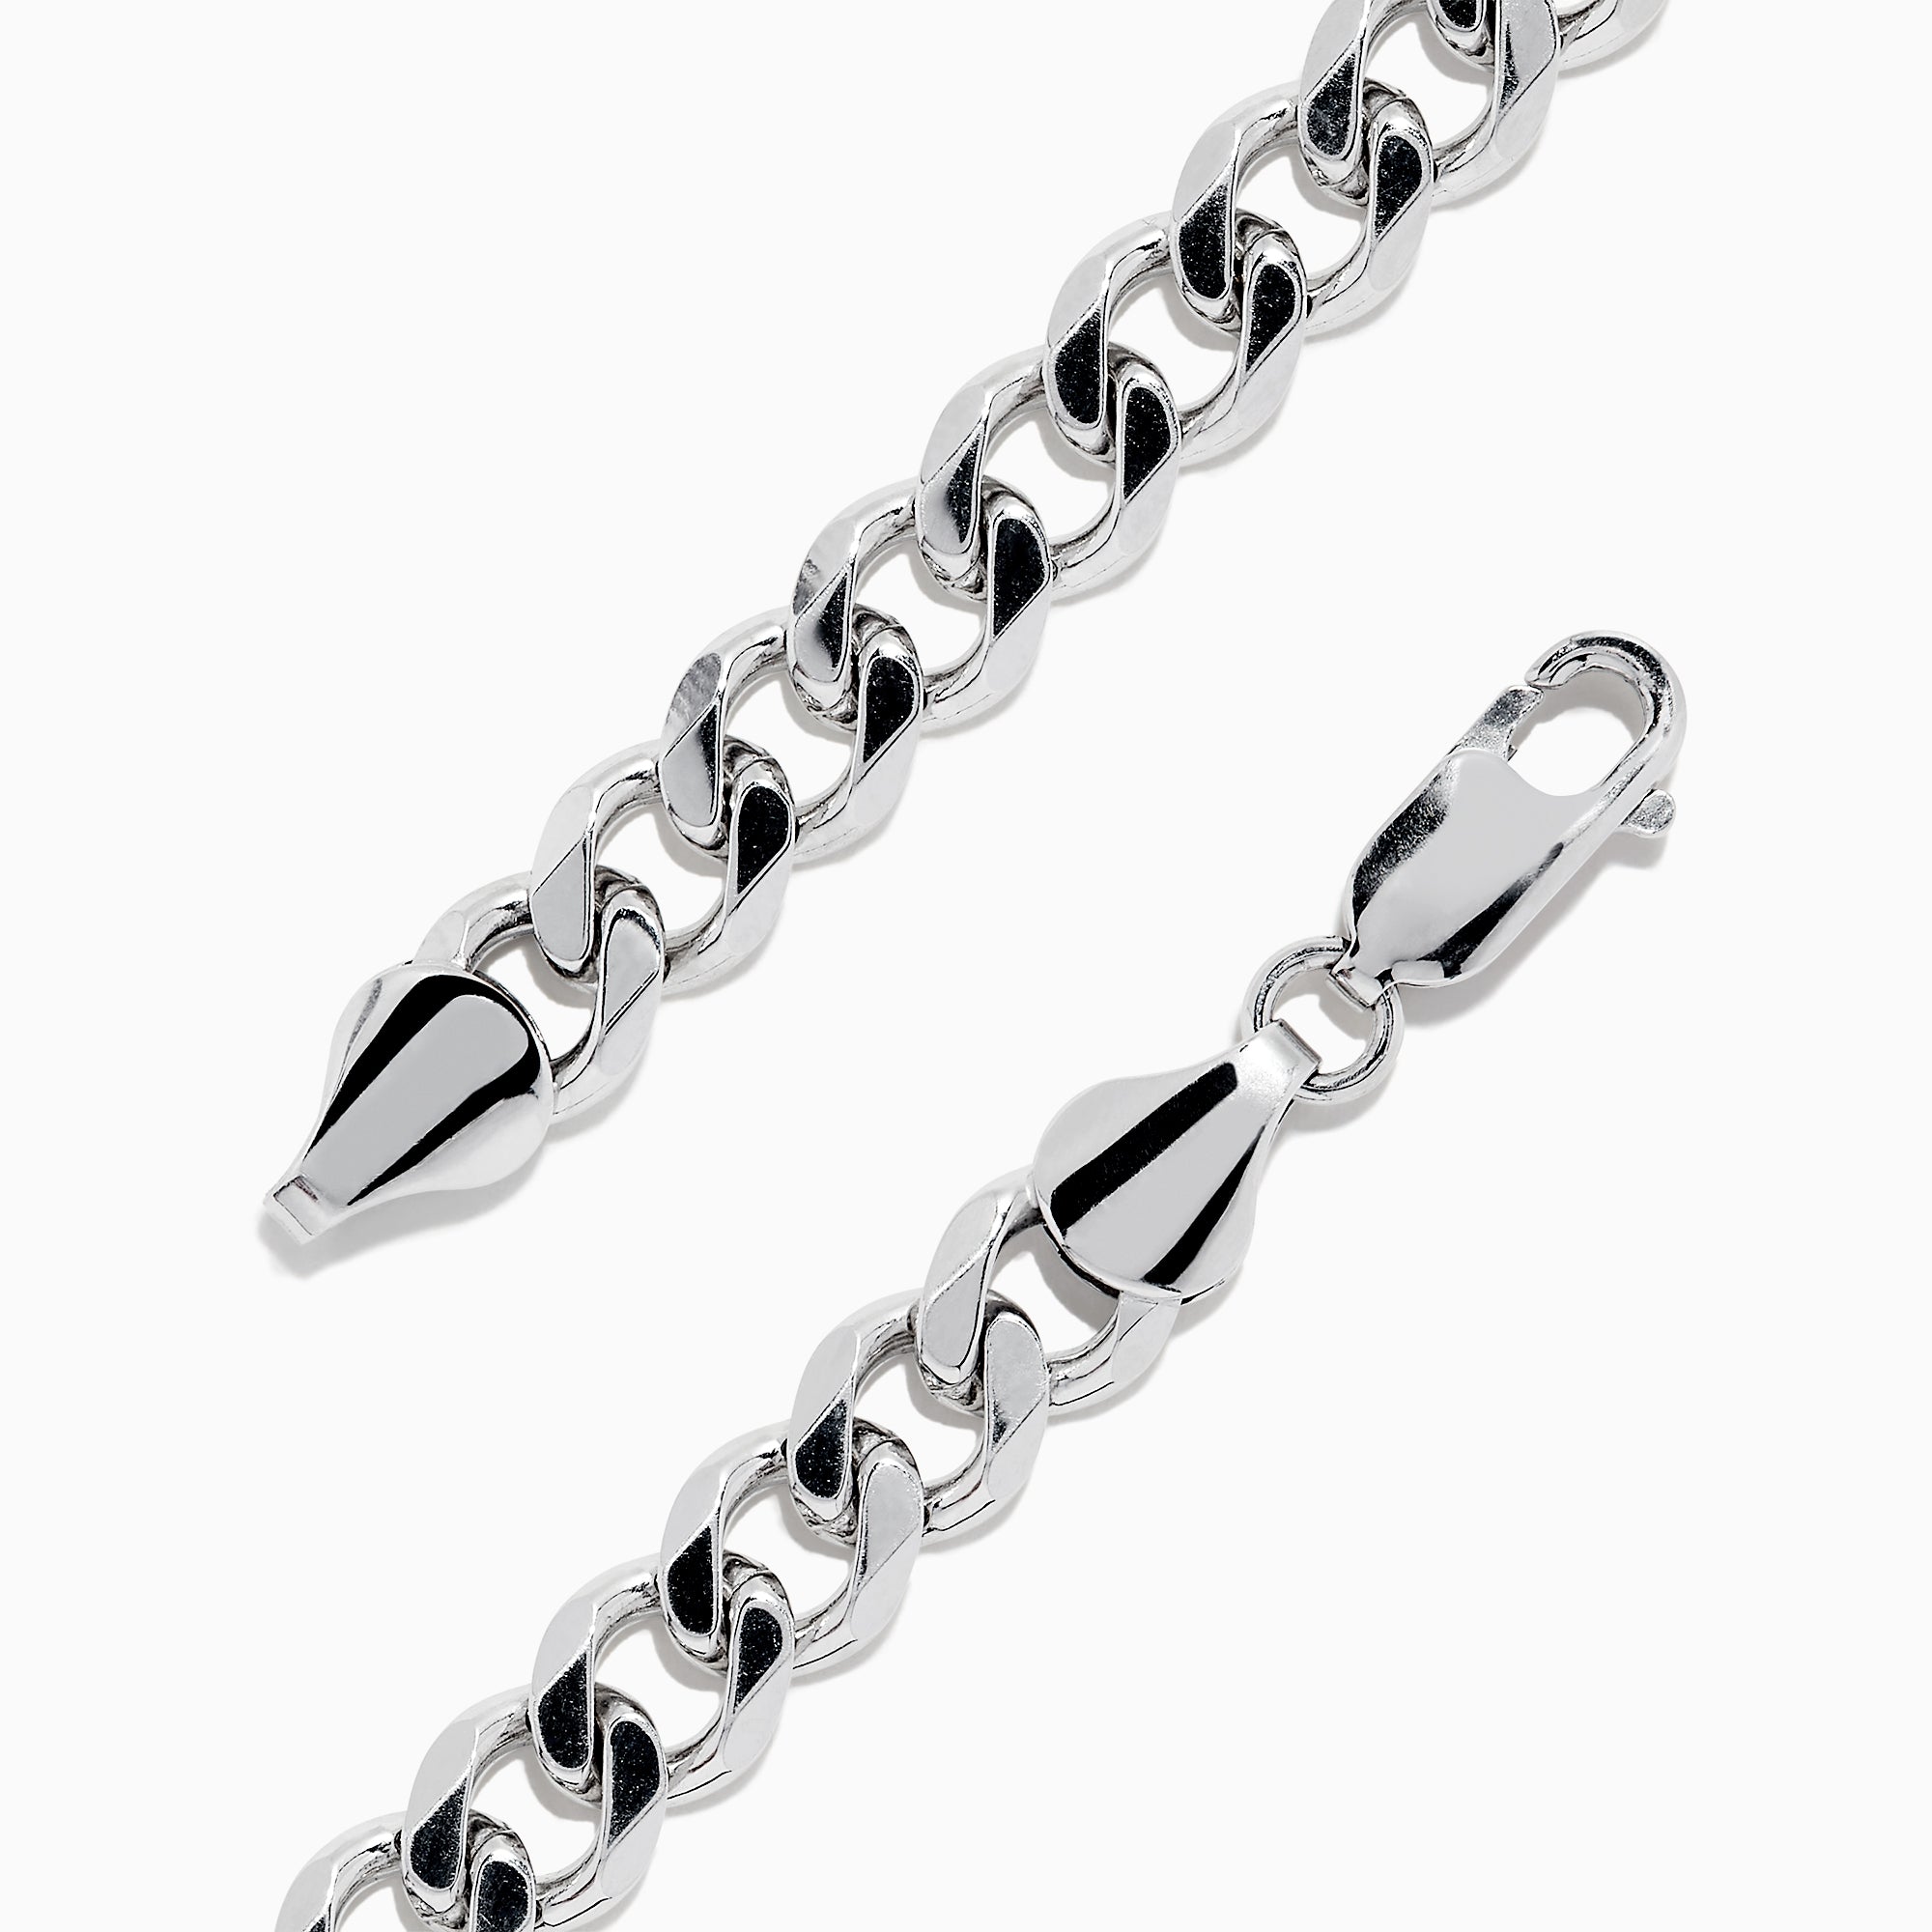 Fashion Figaro Chains Bracelet Male Jewelry 925 Sterling Silver Cuban Curb  Chain Bracelets & Bangles For Men Women 20cm Mixed Color Chains Bracelets |  Wish